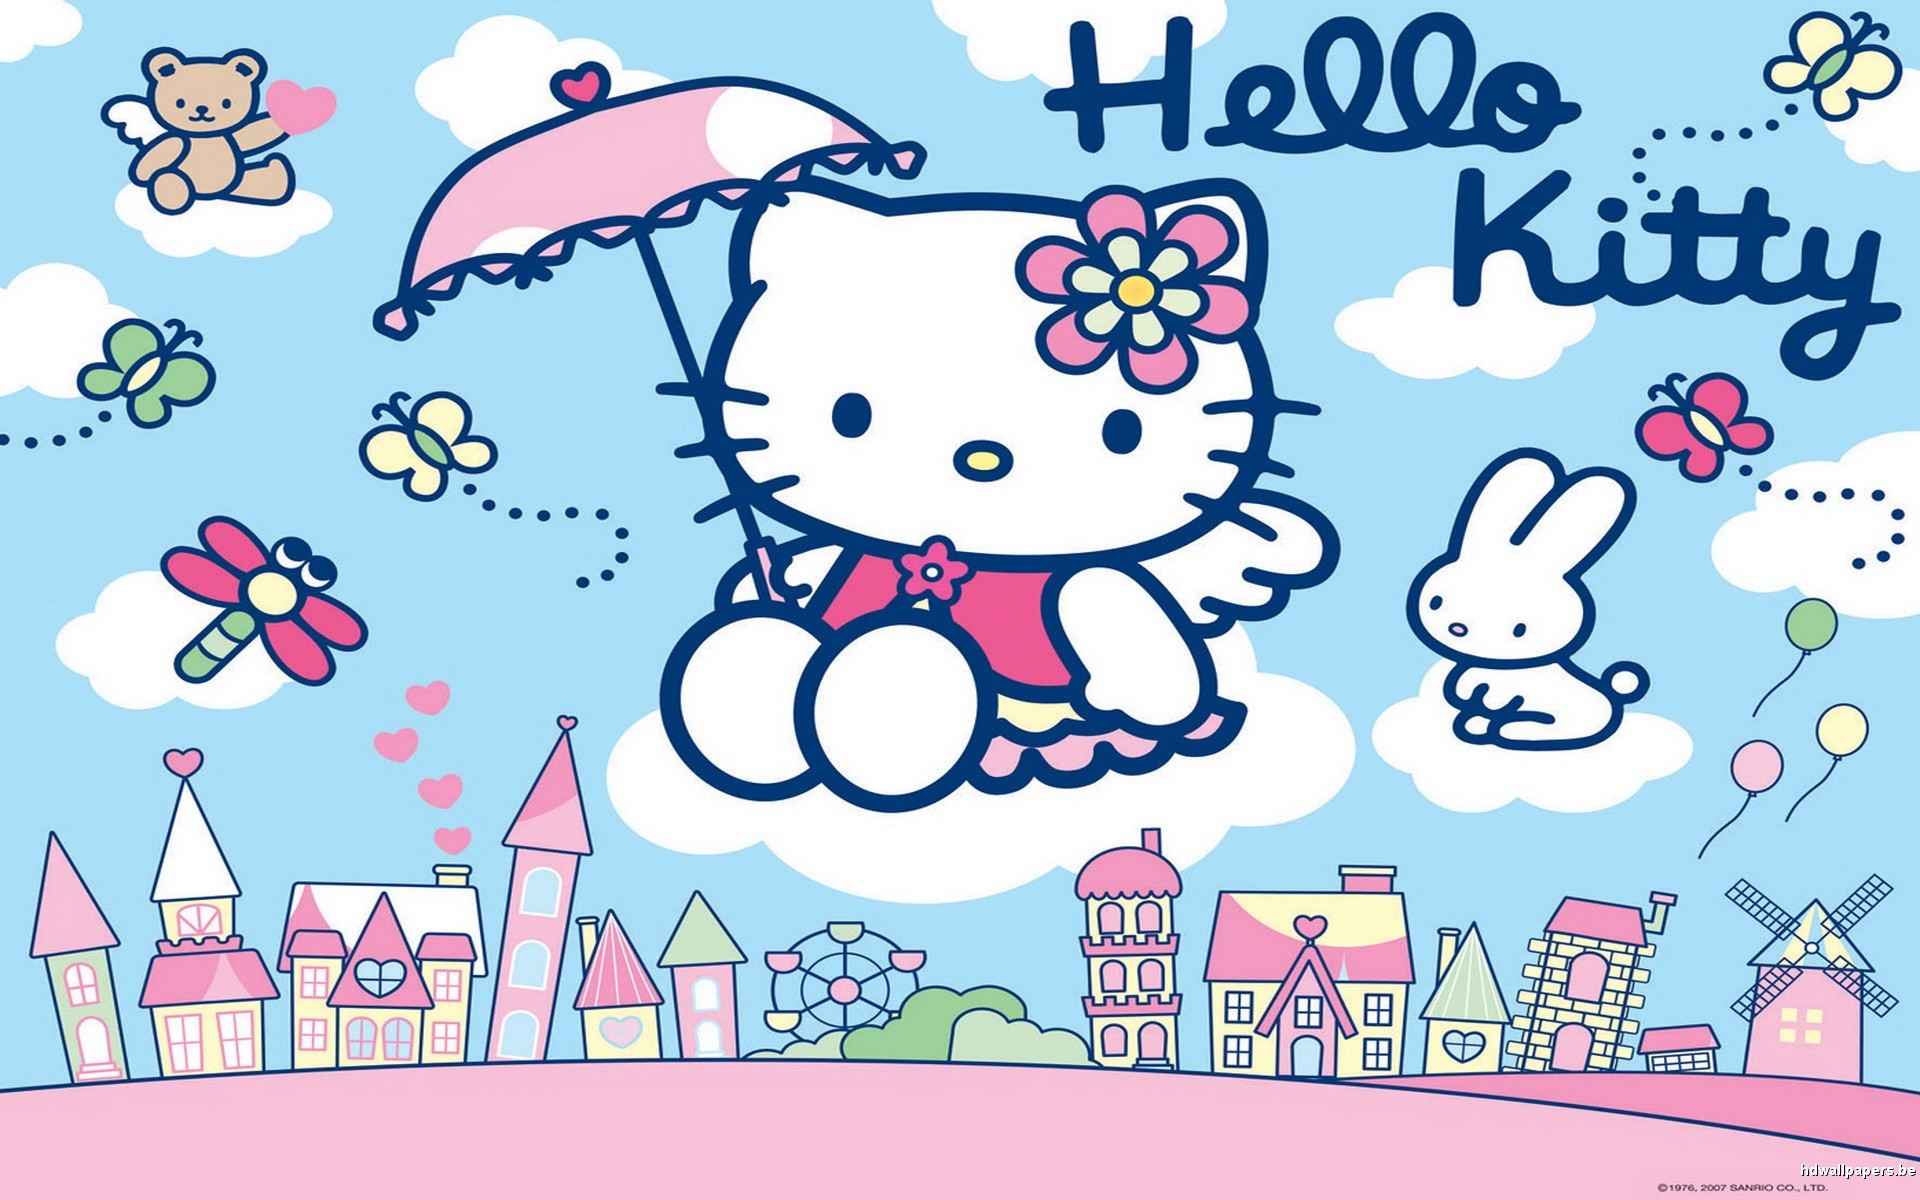 New Hello Kitty Wallpapers Hello Kitty Computer Wallpaper Hello Kitty Wallpaper Hd 1920x1200 Wallpaper Teahub Io Here you can find the best hello kitty wallpapers uploaded by our community. teahub io